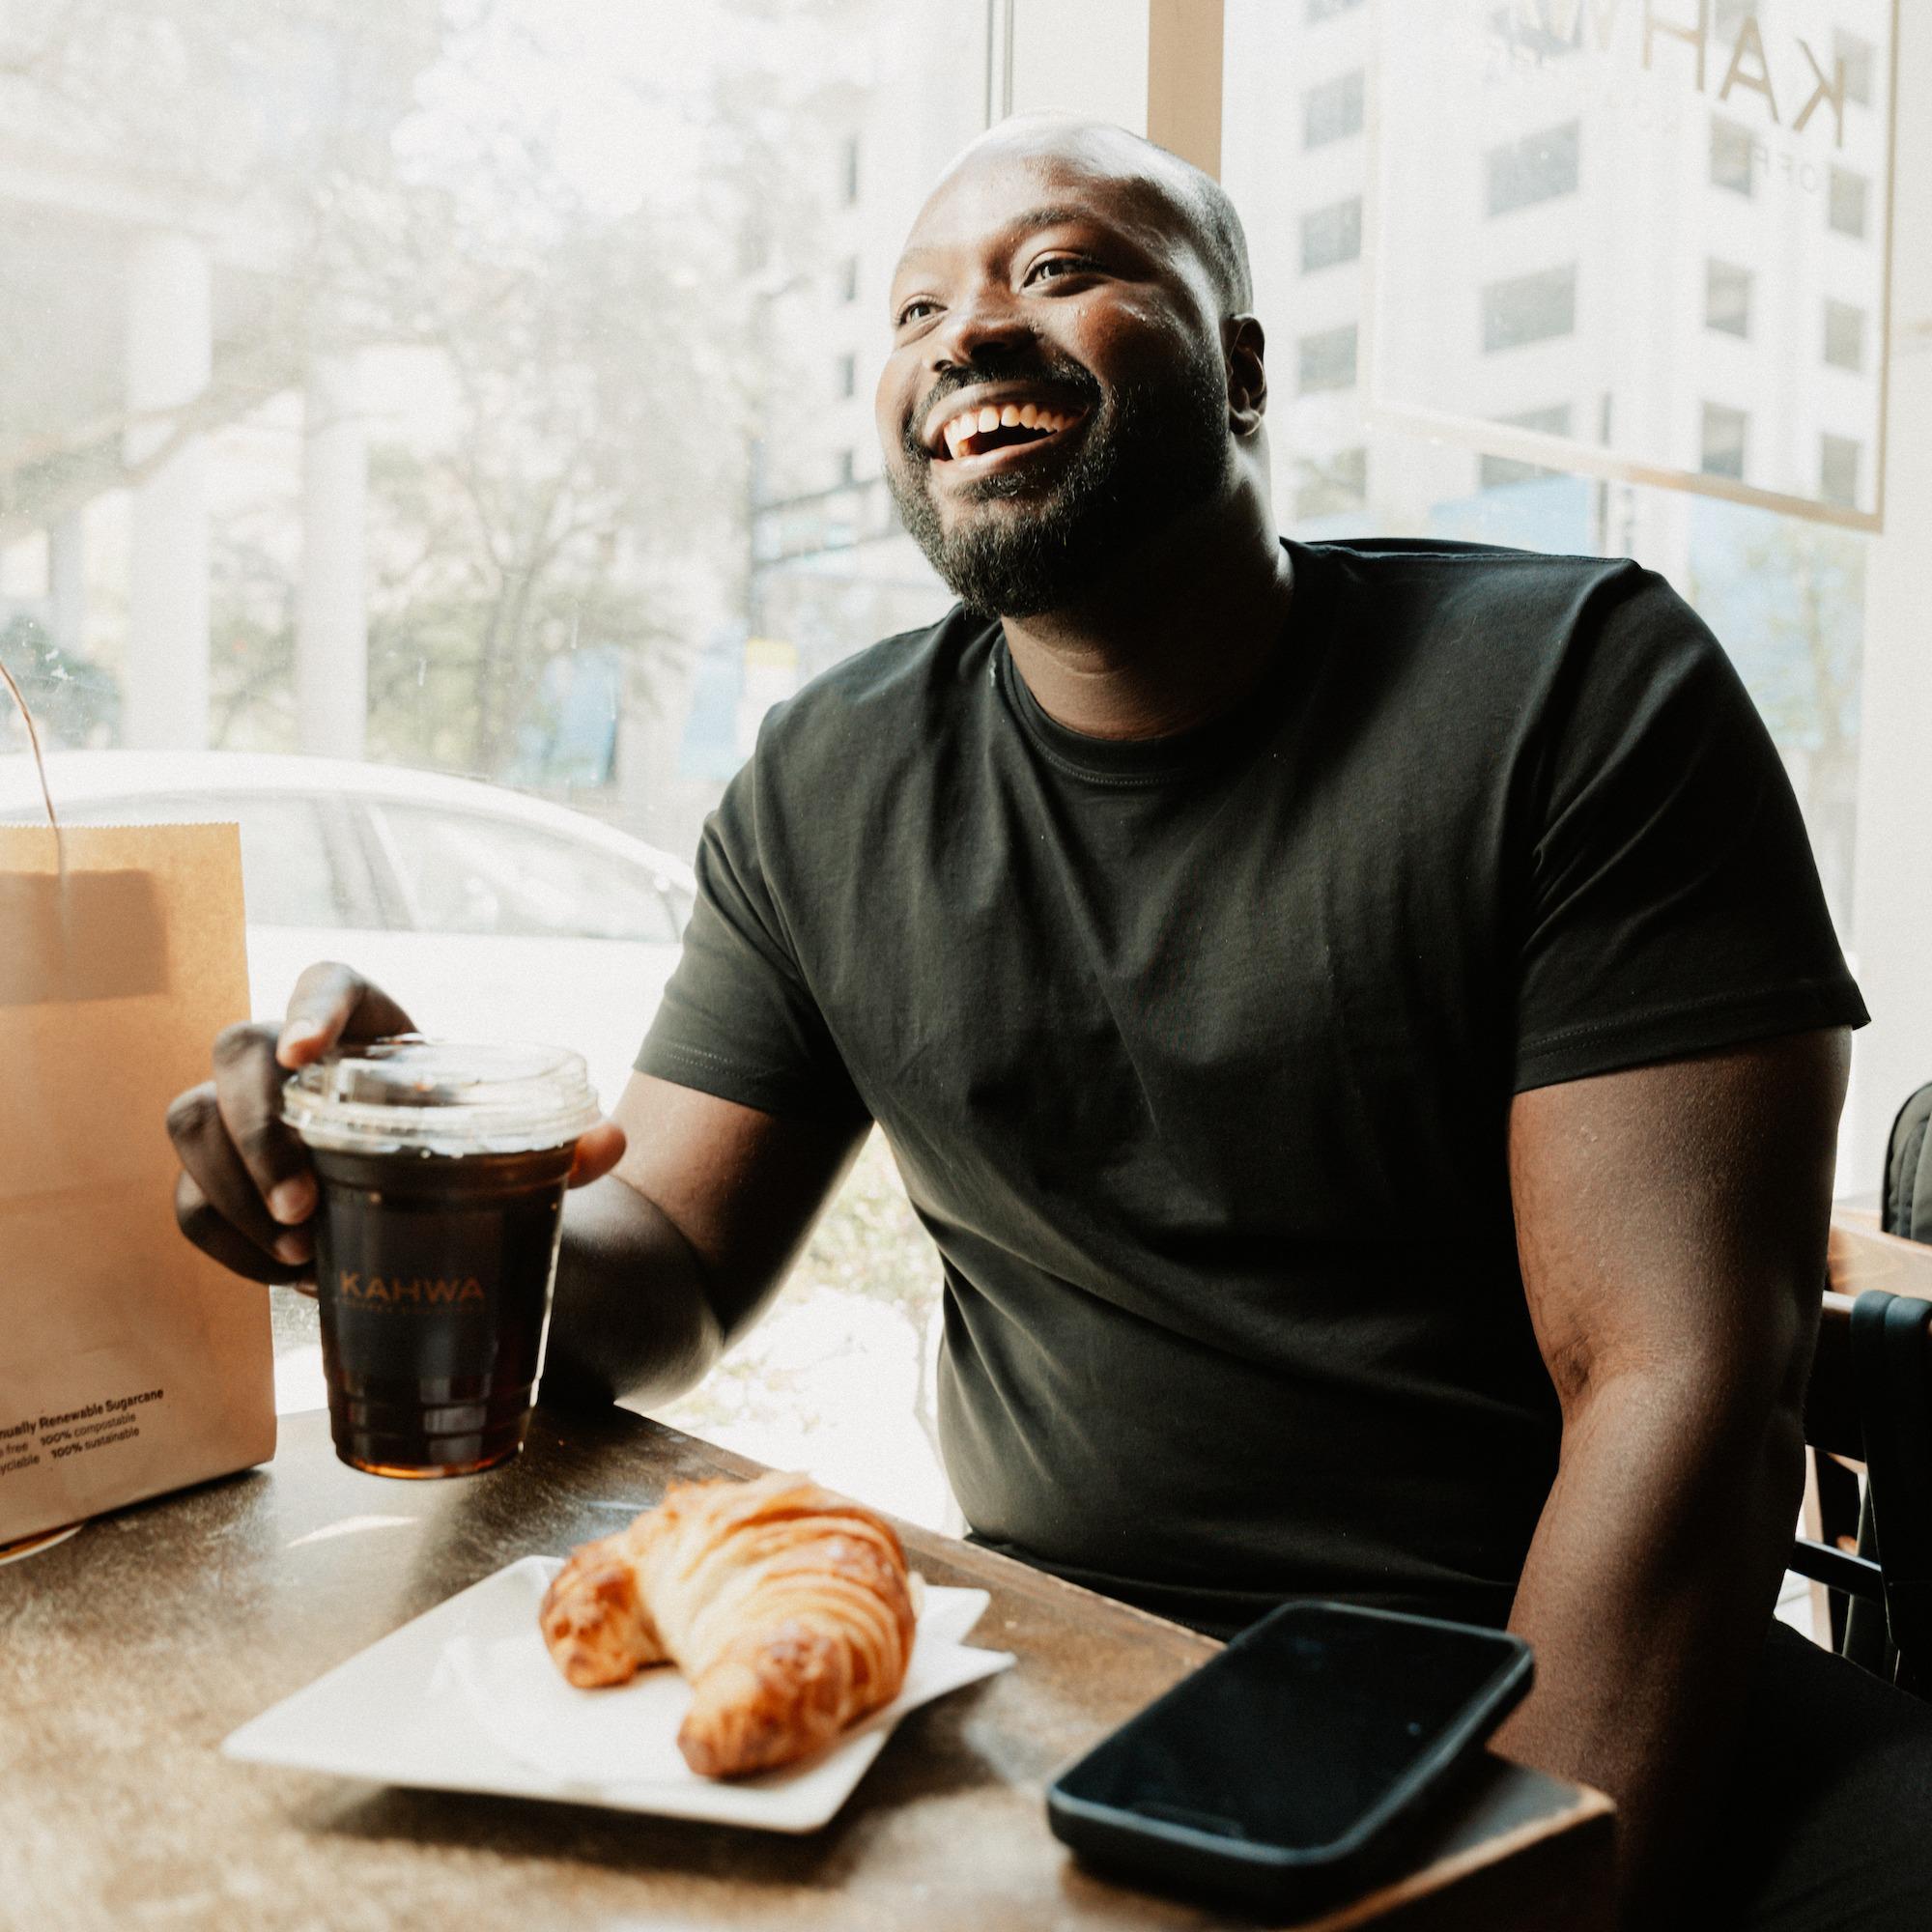 Man with Kahwa Coffee and food smiling